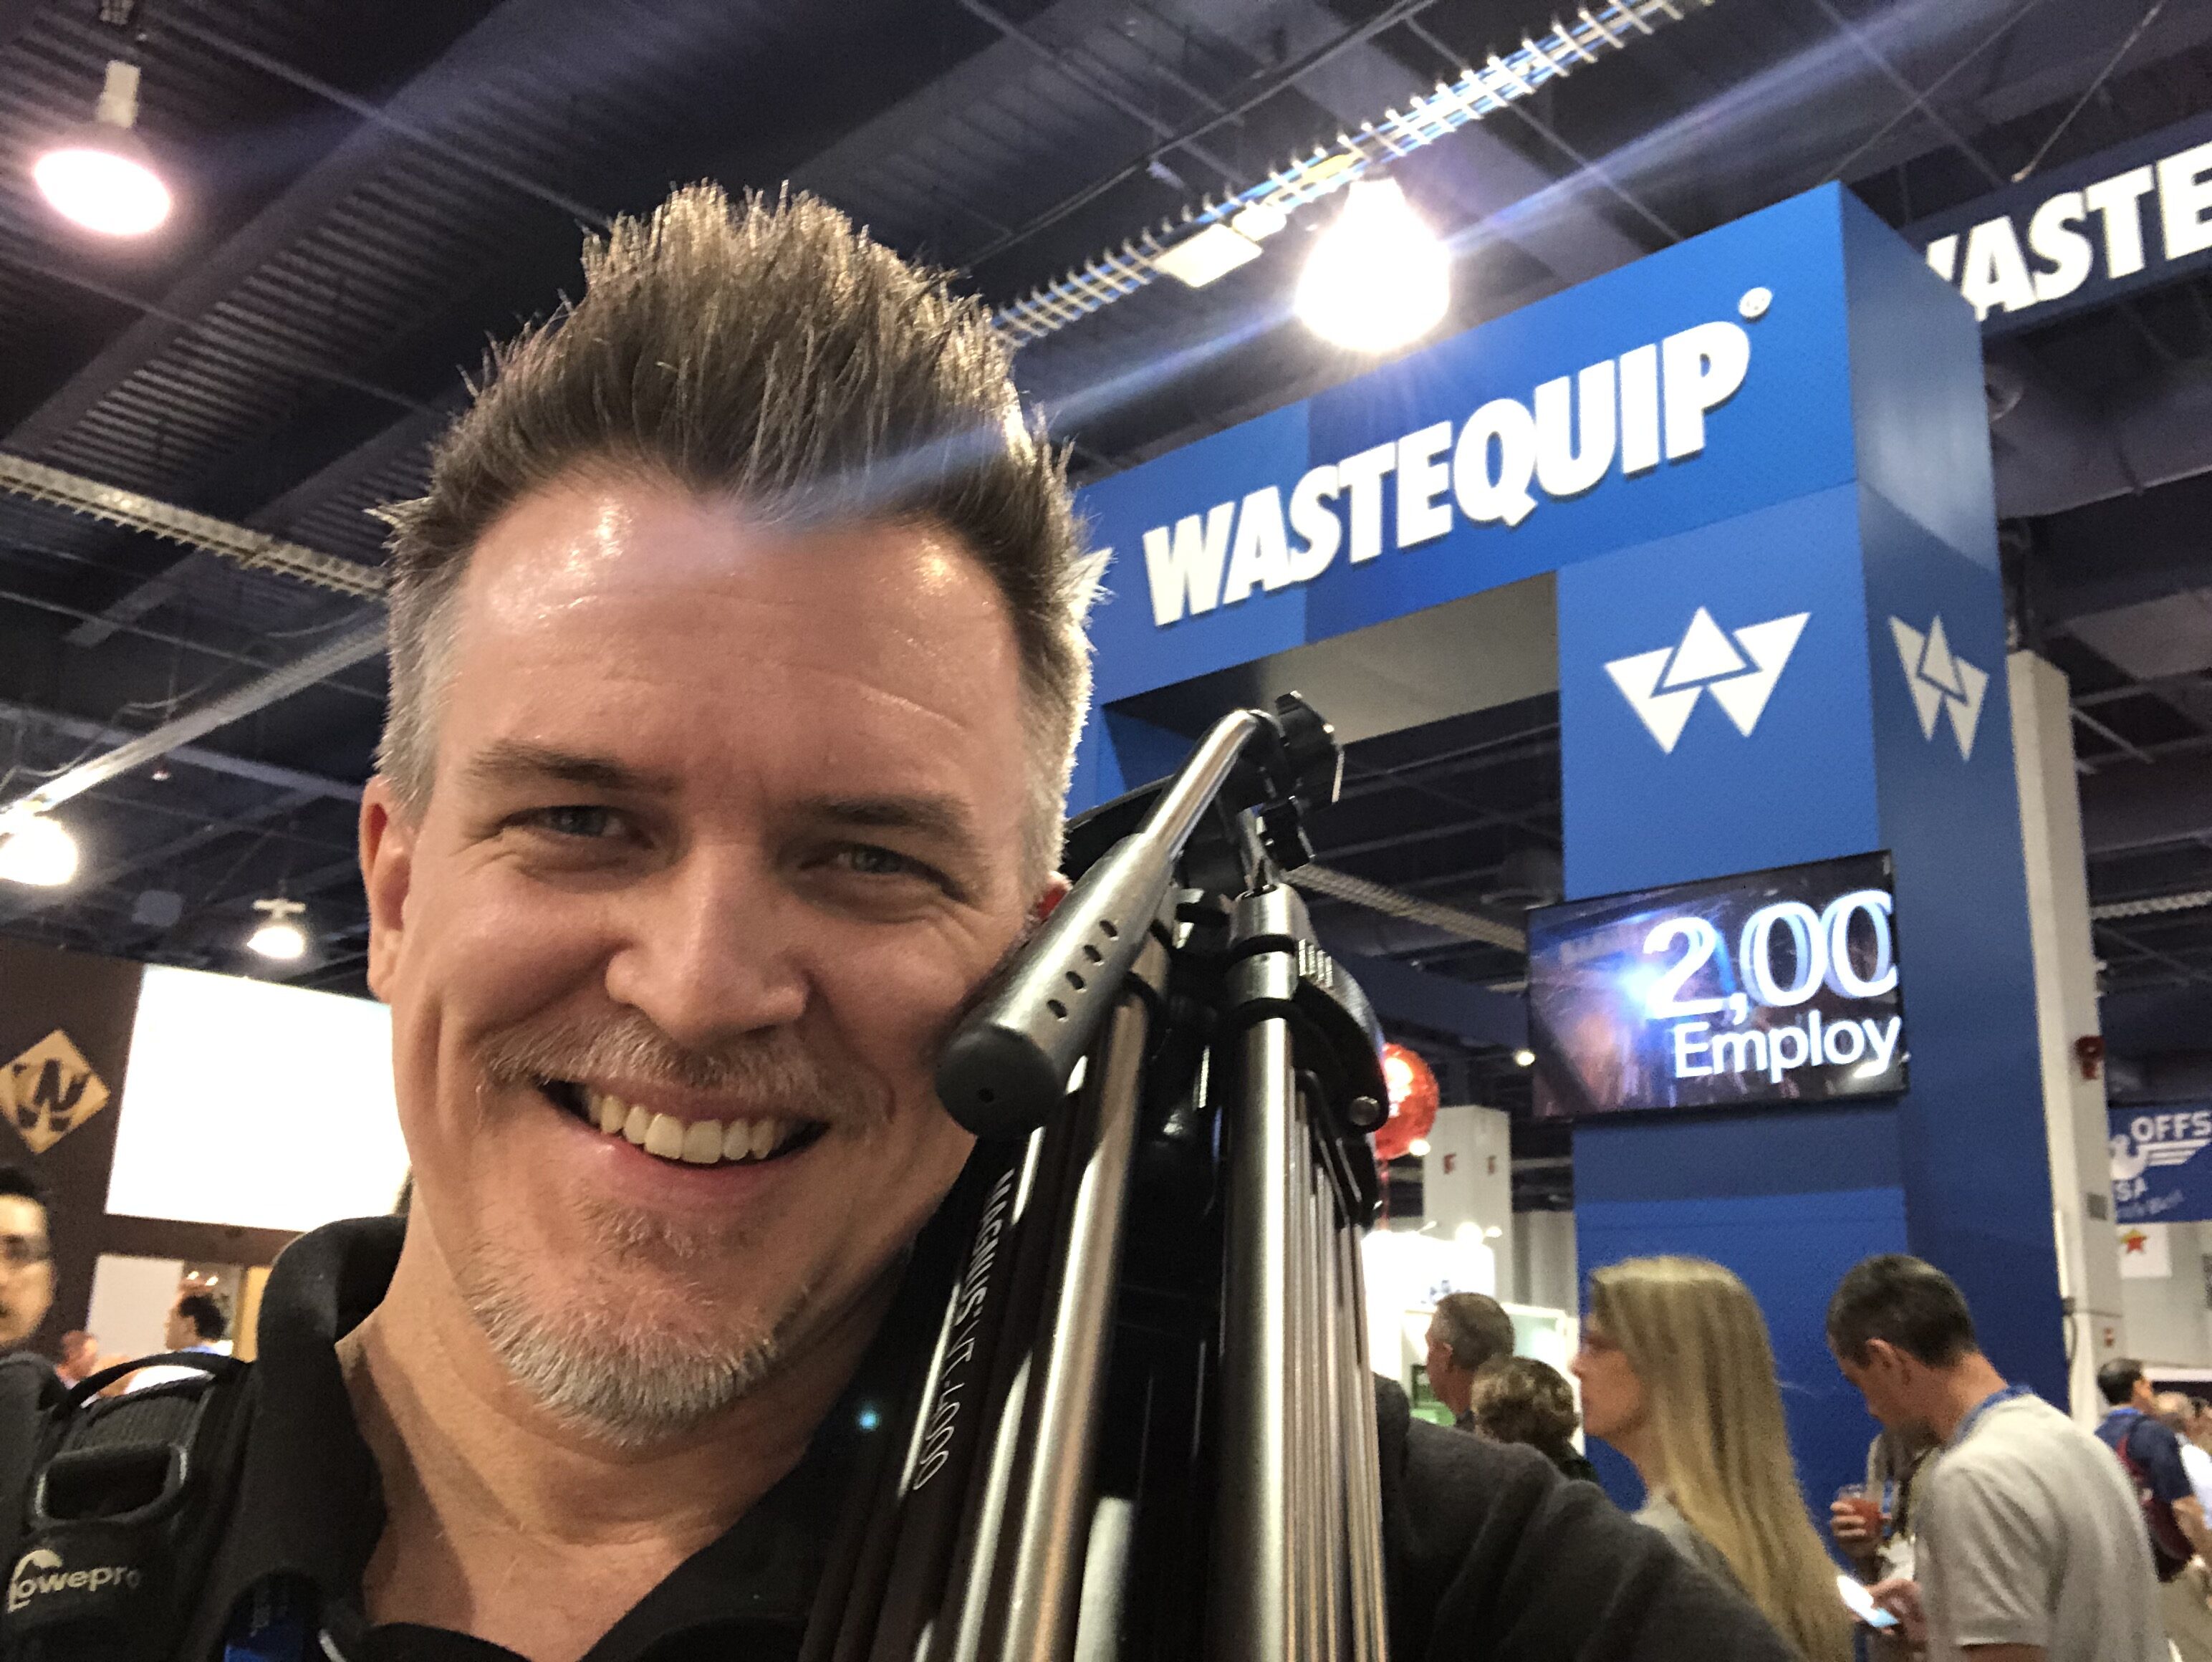 trade show shoot with wastequip